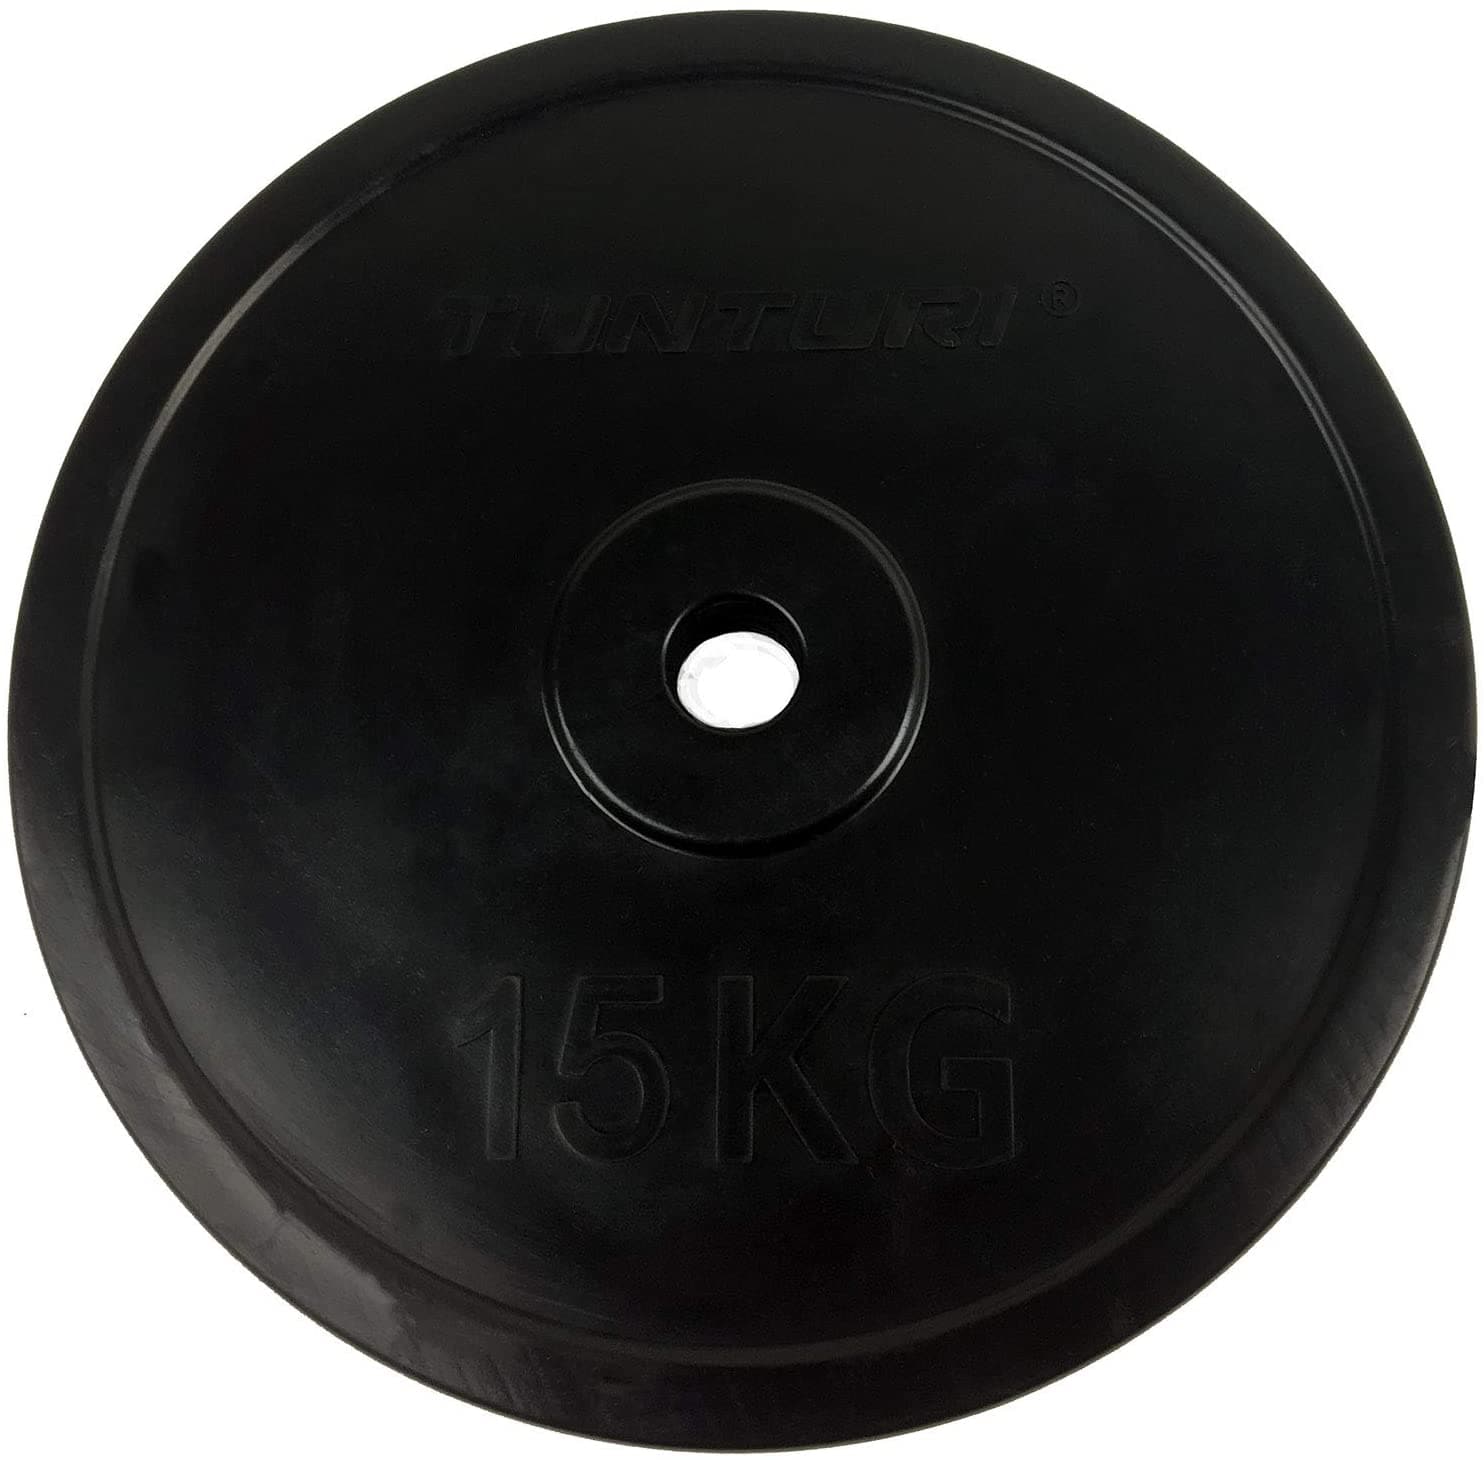 MF Black Rubber Plate 25 mm bore, 2.5 Kg to 20Kg, Sold as Piece - Athletix.ae